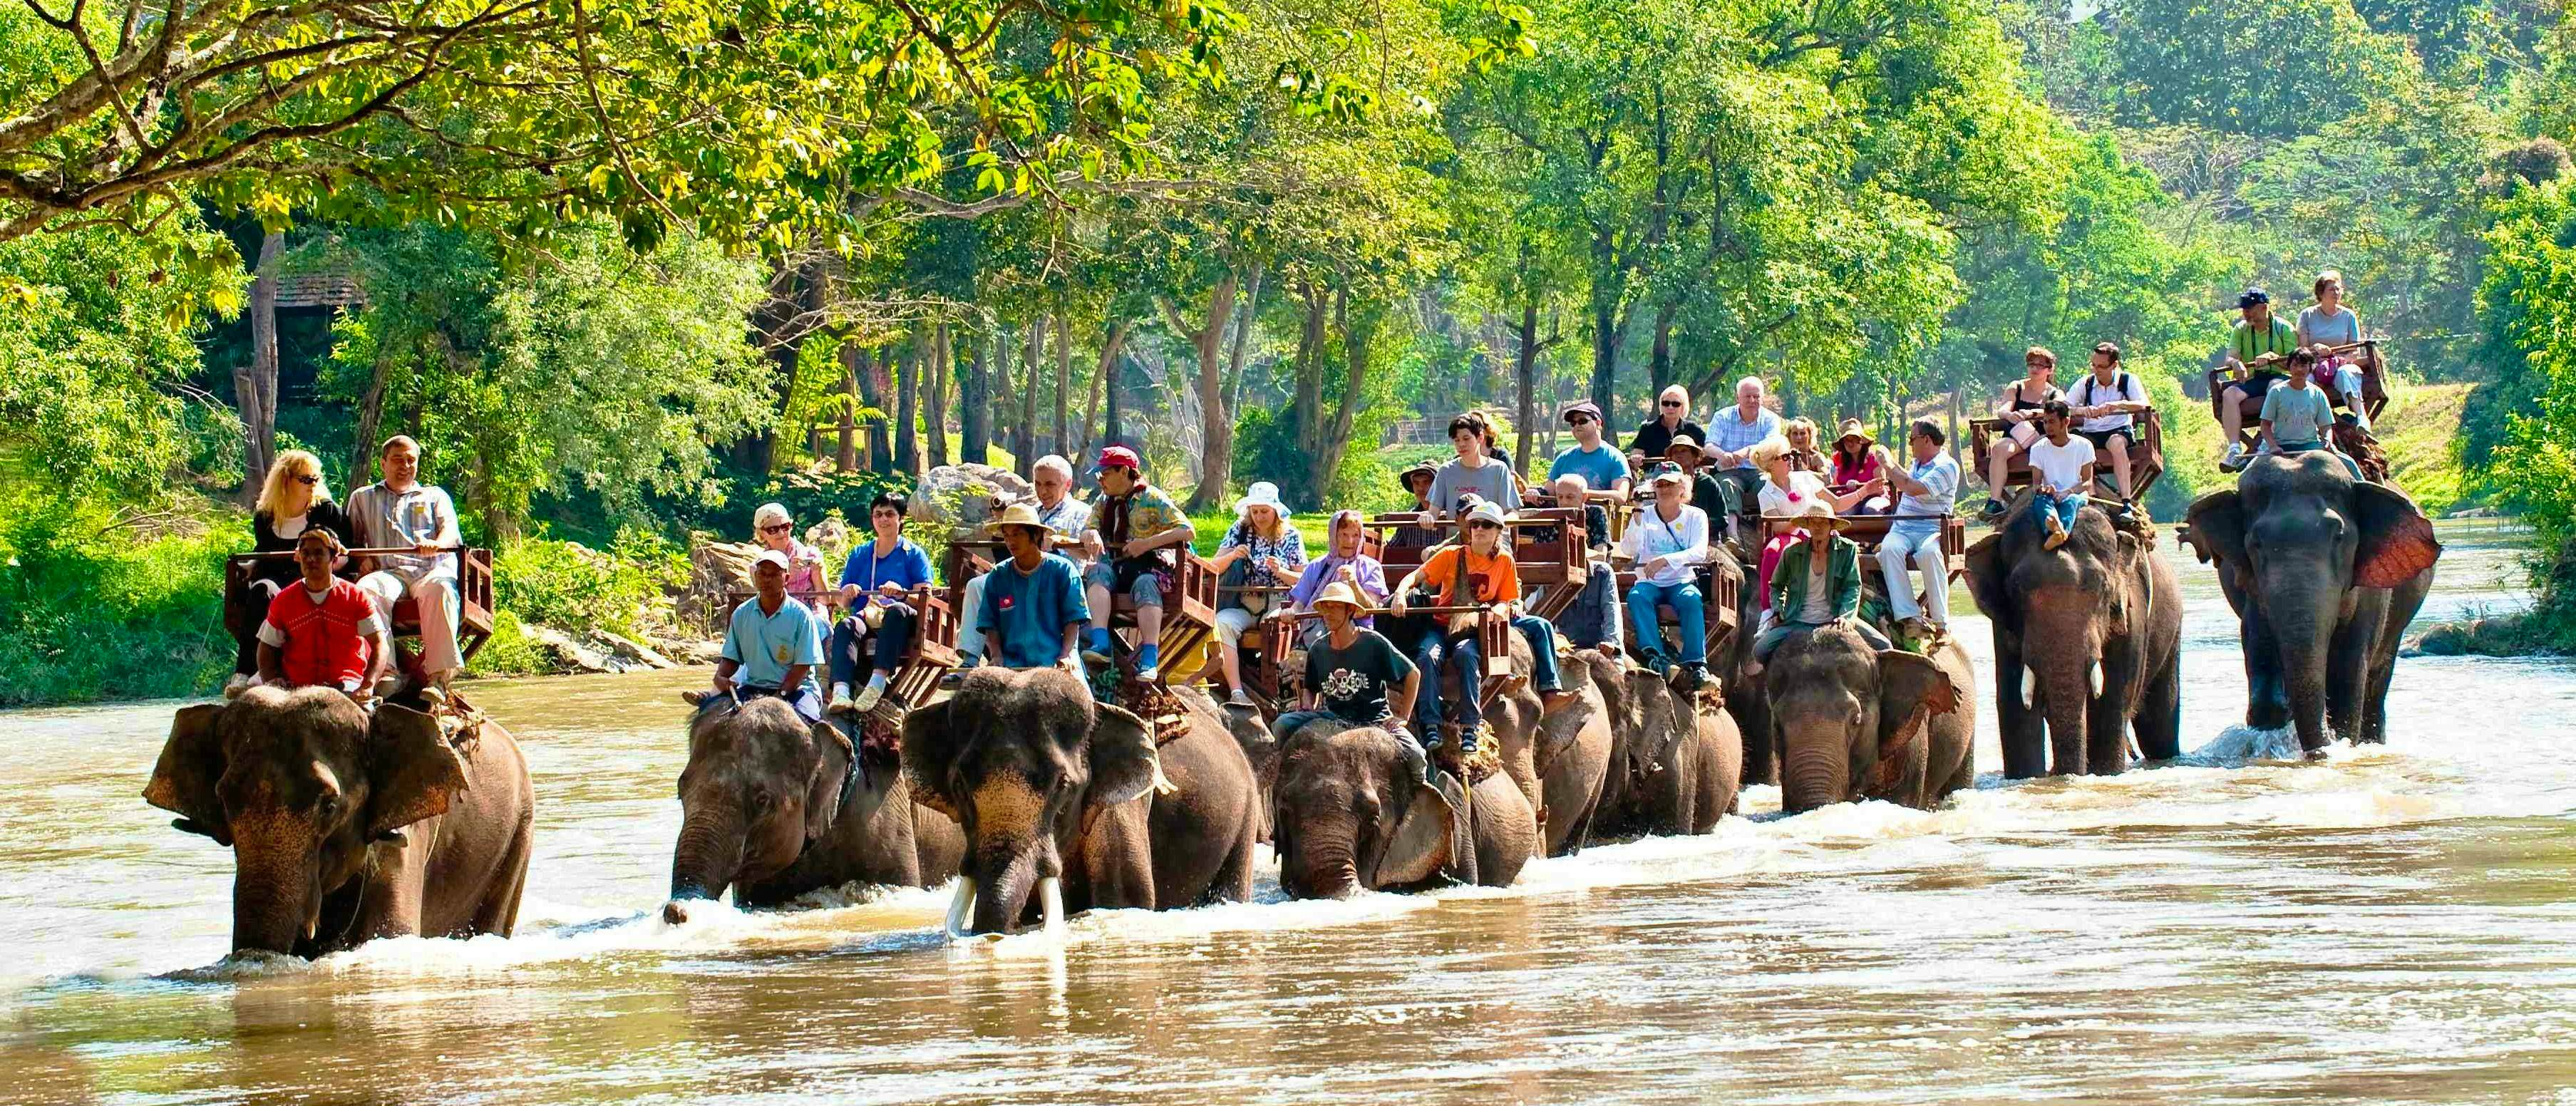 Enthralling Hot Spring & jungle tour whilst exploring the Natural Wonders of Krabi and an elephant ride